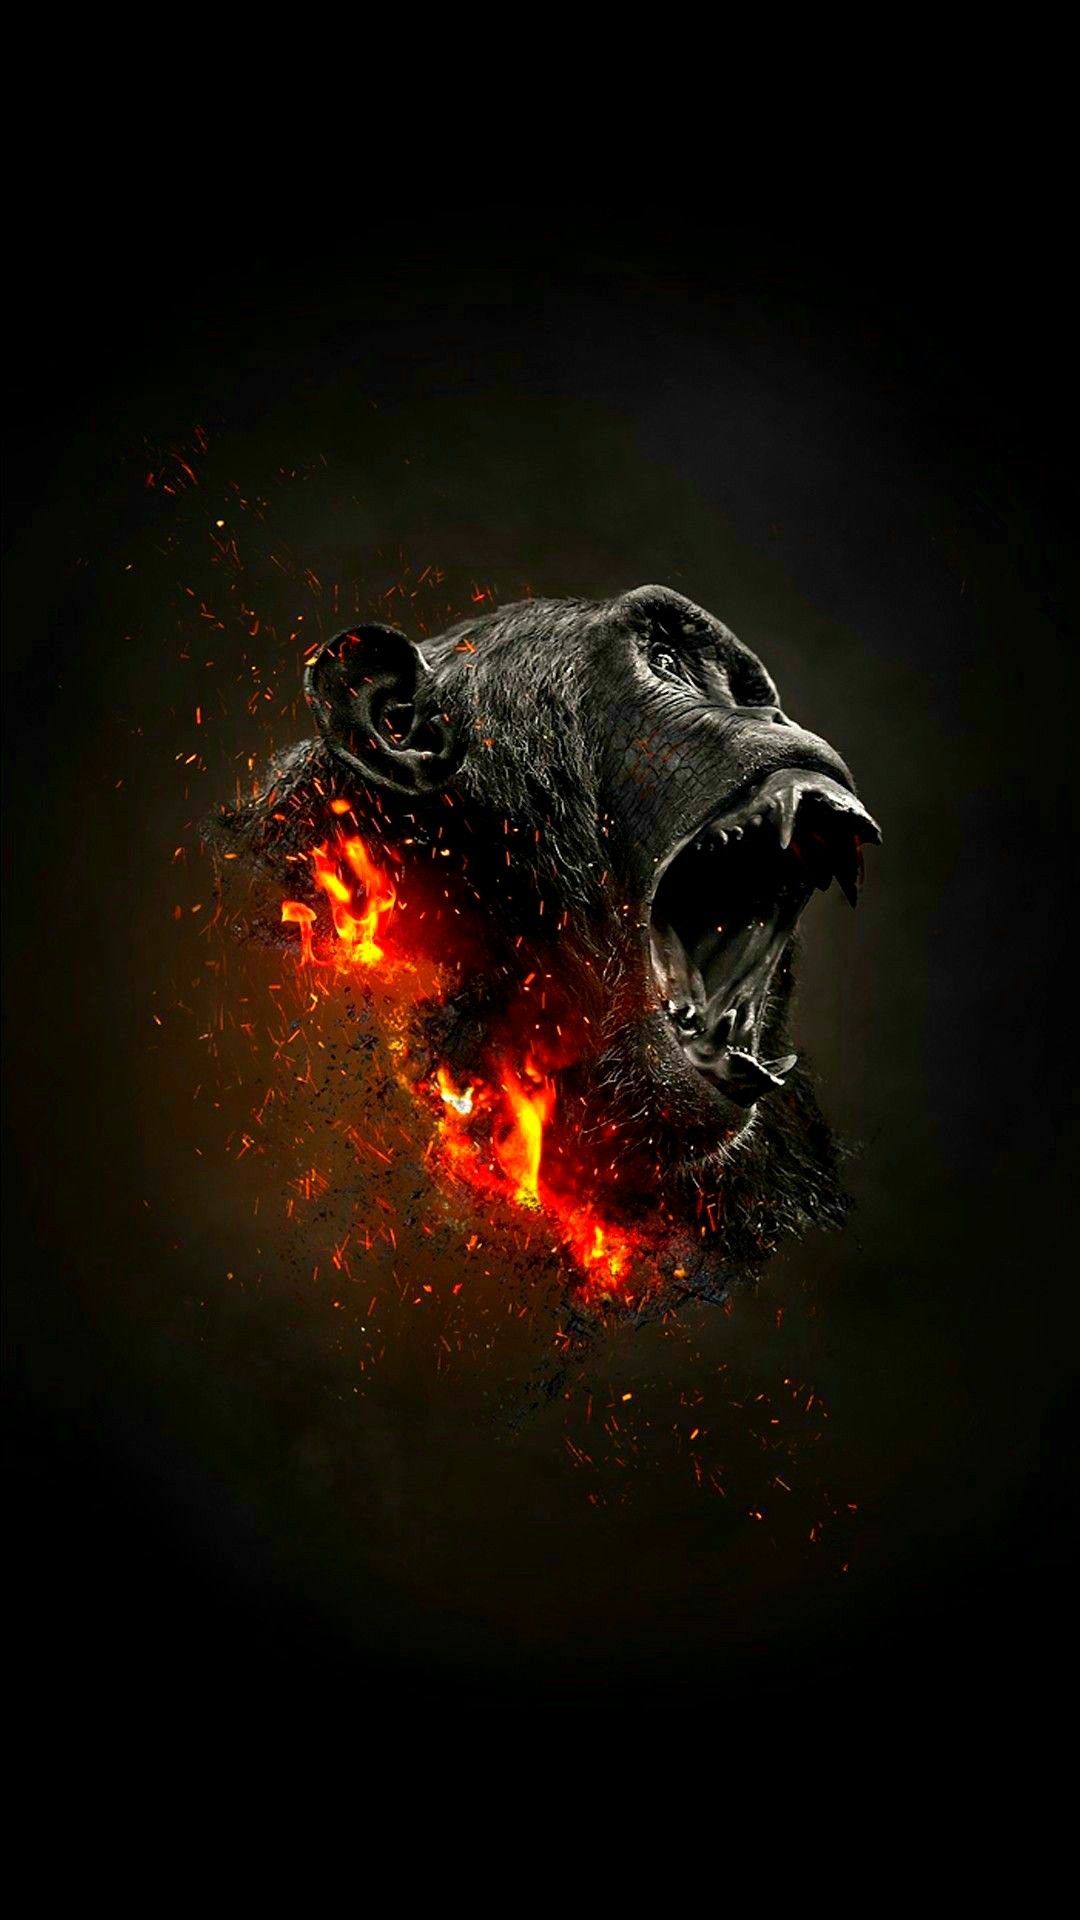 Android, Iphone, Desktop Hd Backgrounds / Wallpapers - Angry Gorilla Wallpaper Hd - HD Wallpaper 